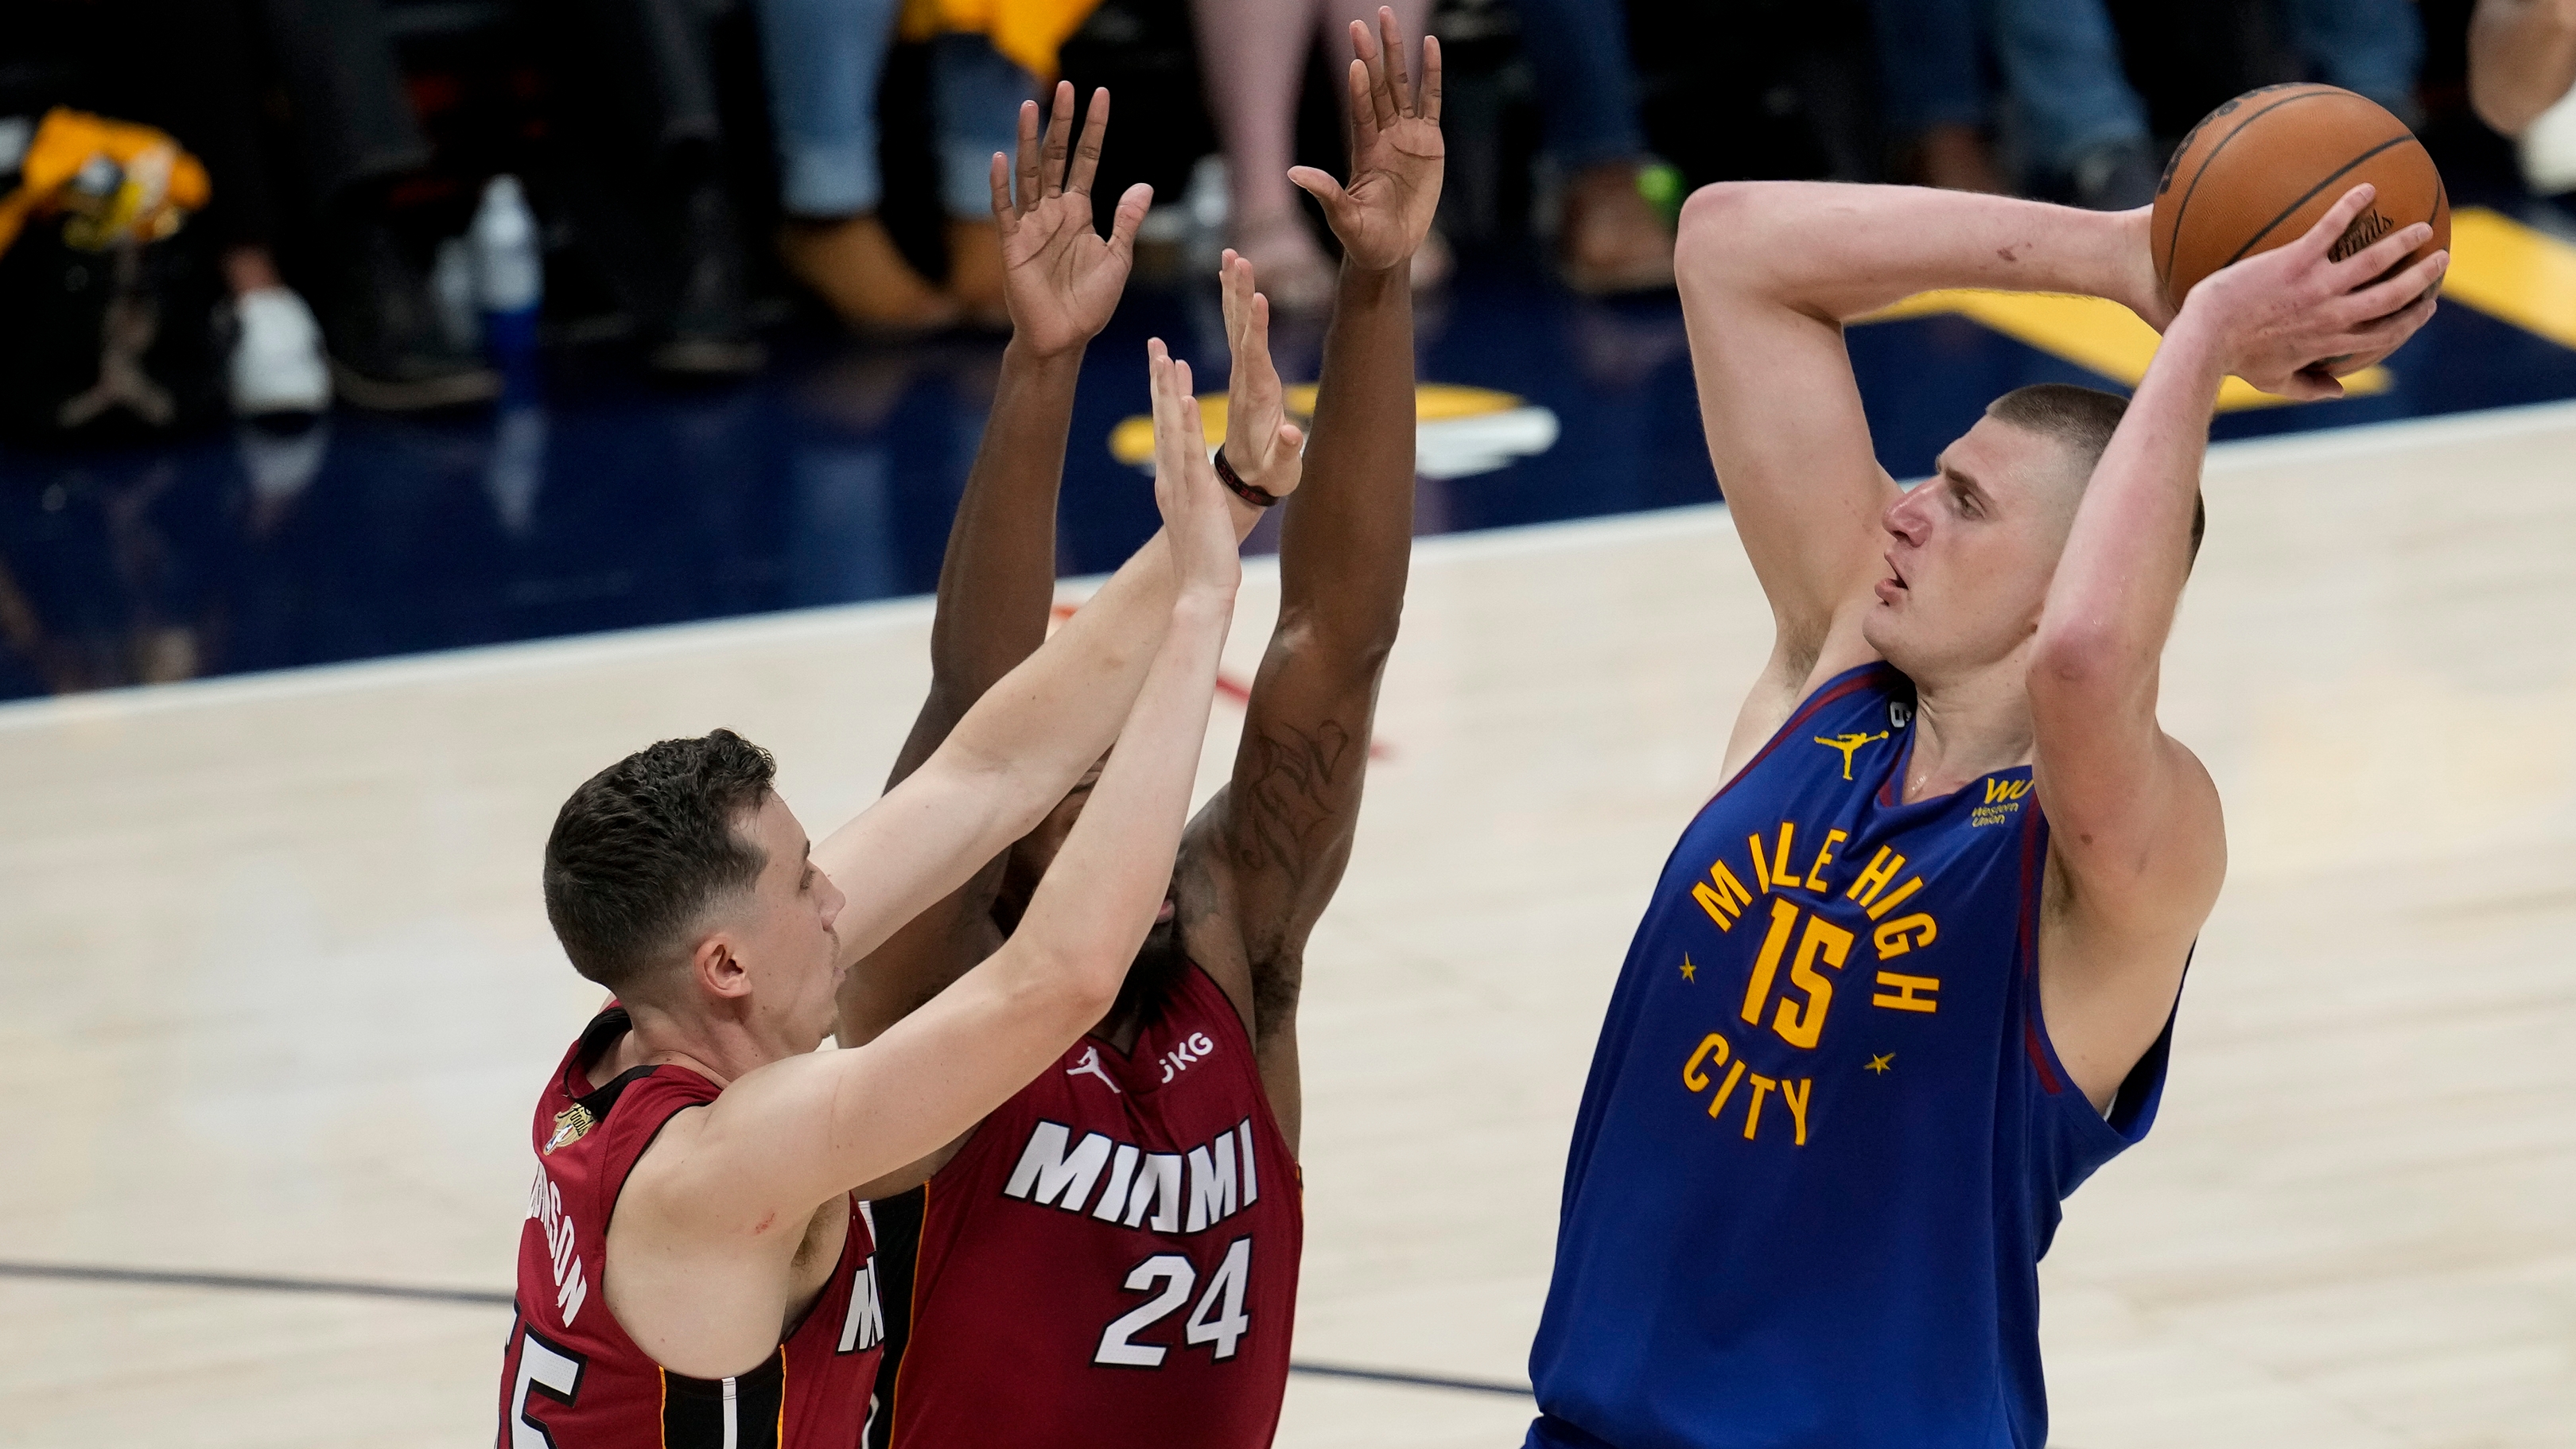 You can own Nikola Jokic's jersey from Game 3 of the NBA Finals